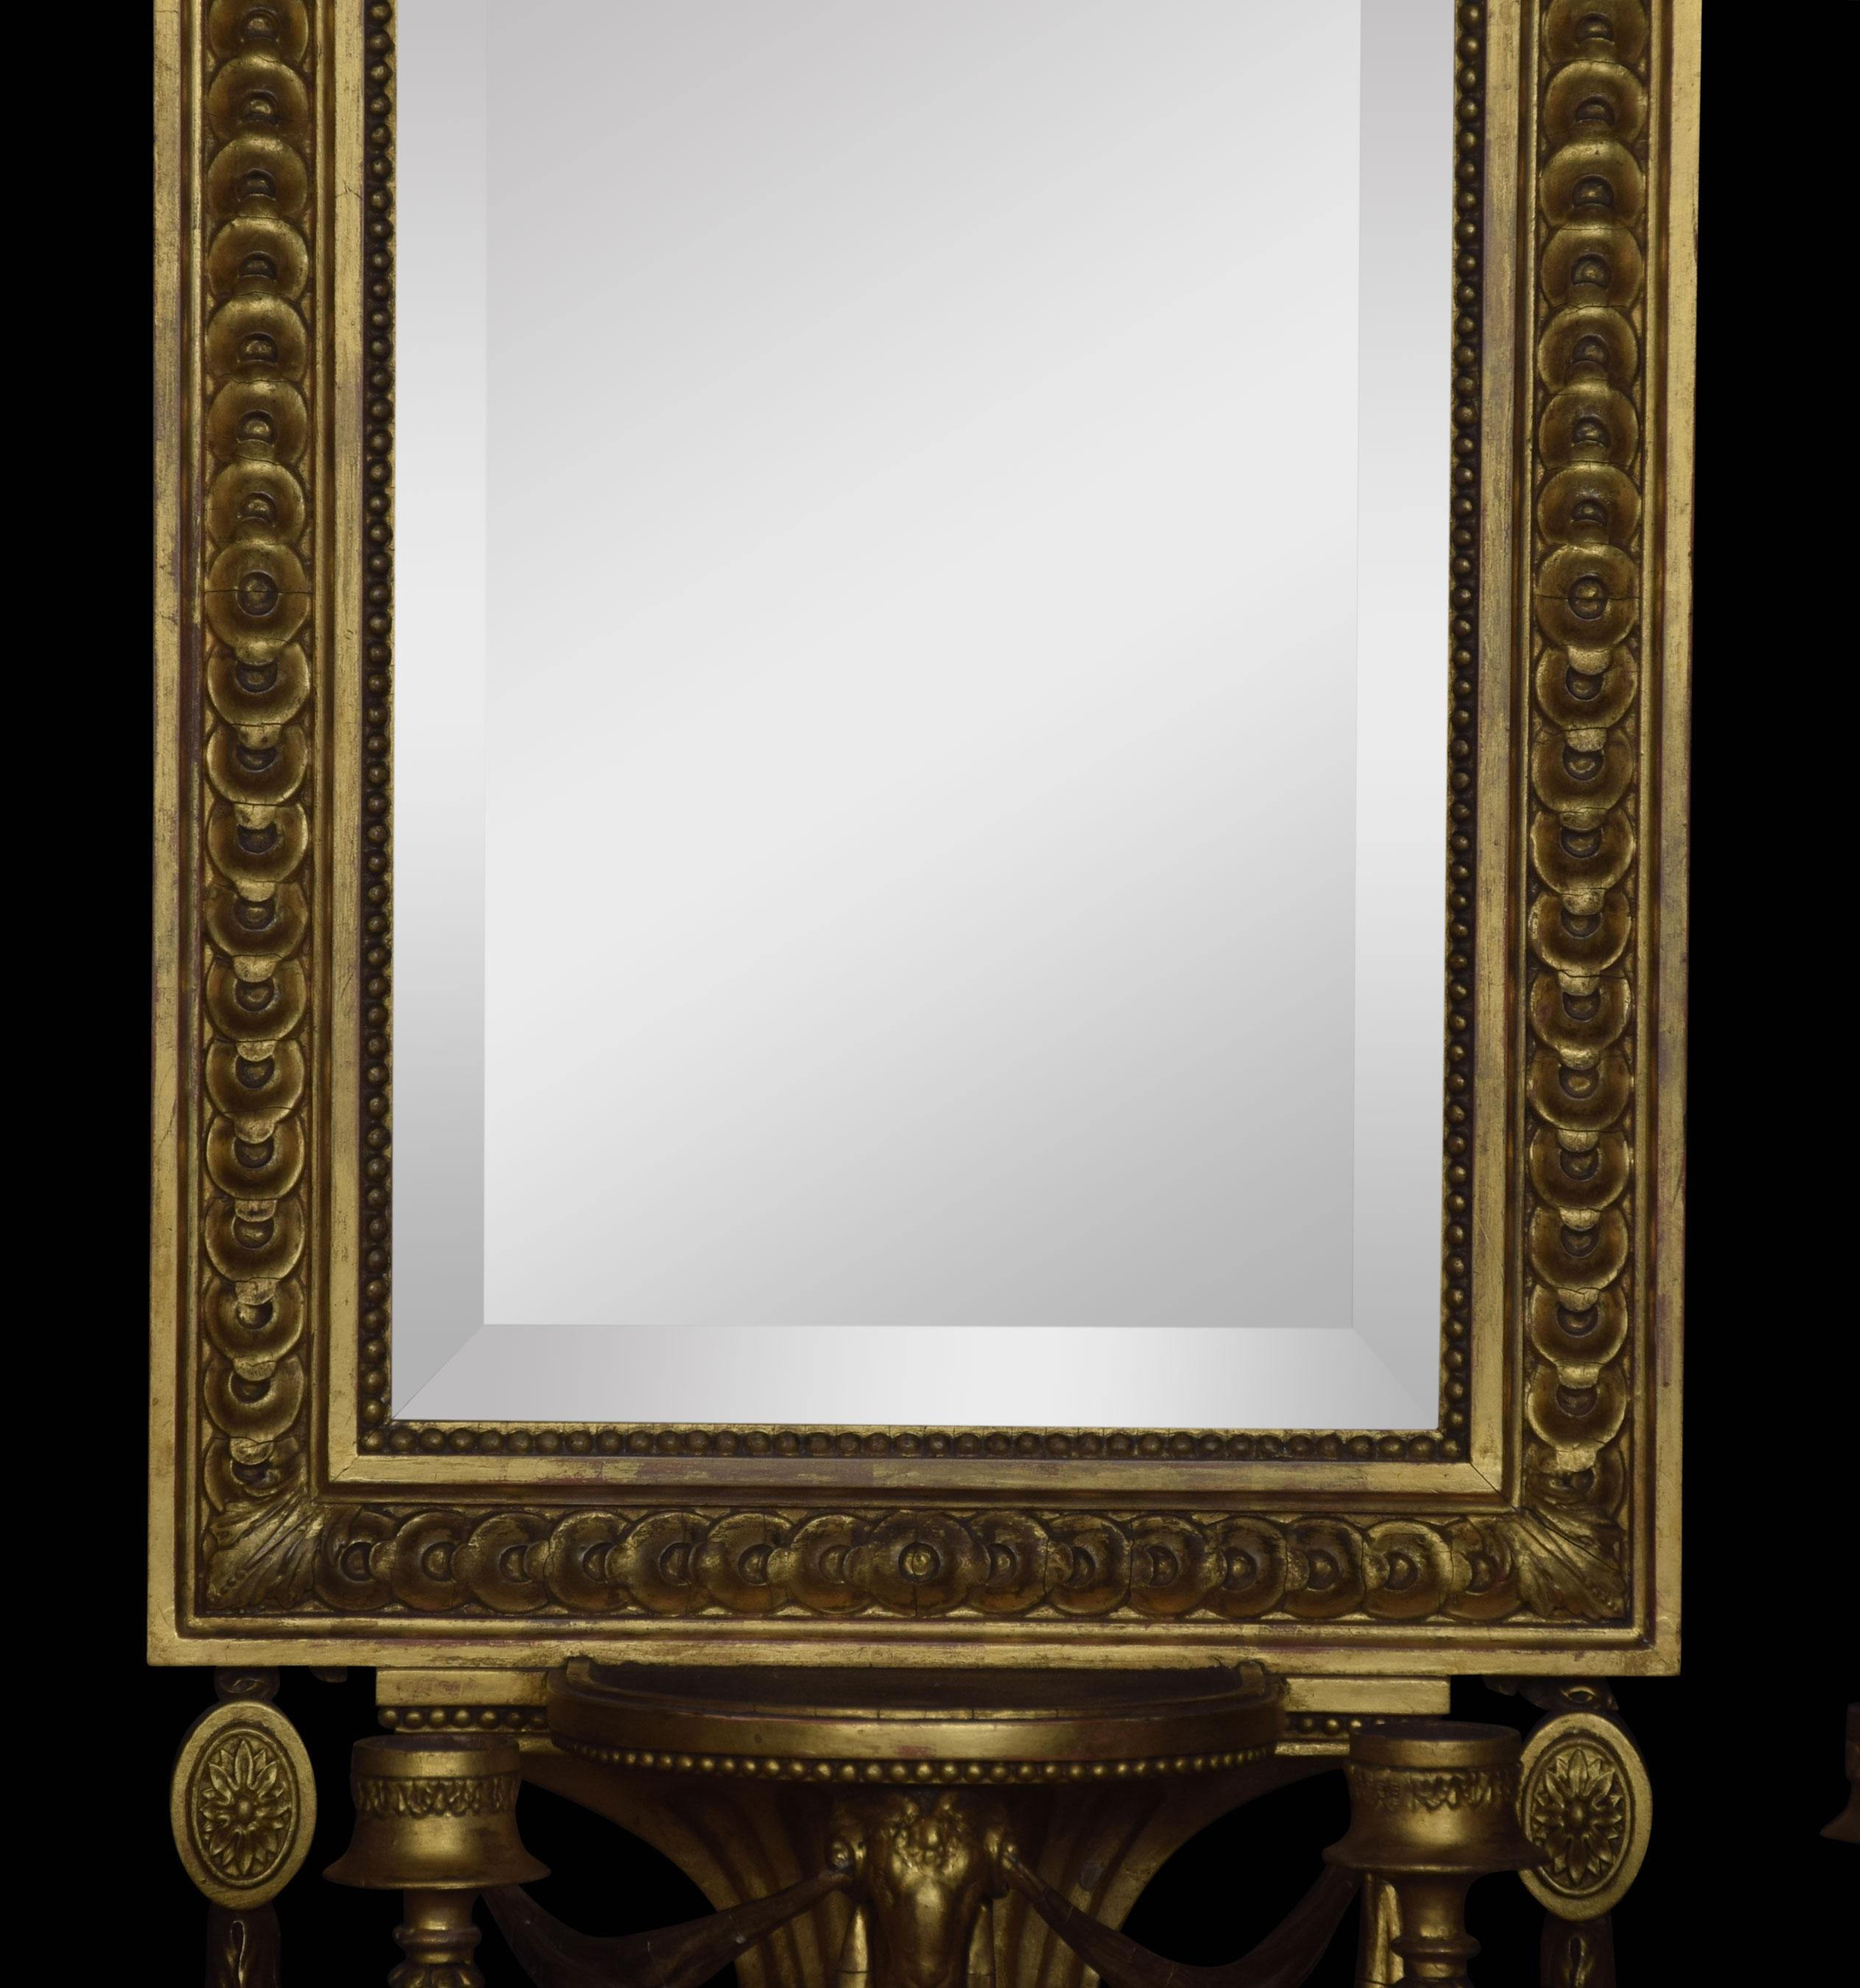 A pair of late 19th century girandoles. Each fitted with the original beveled plate and a small shelf below encased in a giltwood frame, with four scrolled sconces to the base.
Dimensions:
Height 27.5 inches
Width 13 inches
Depth 7 inches.